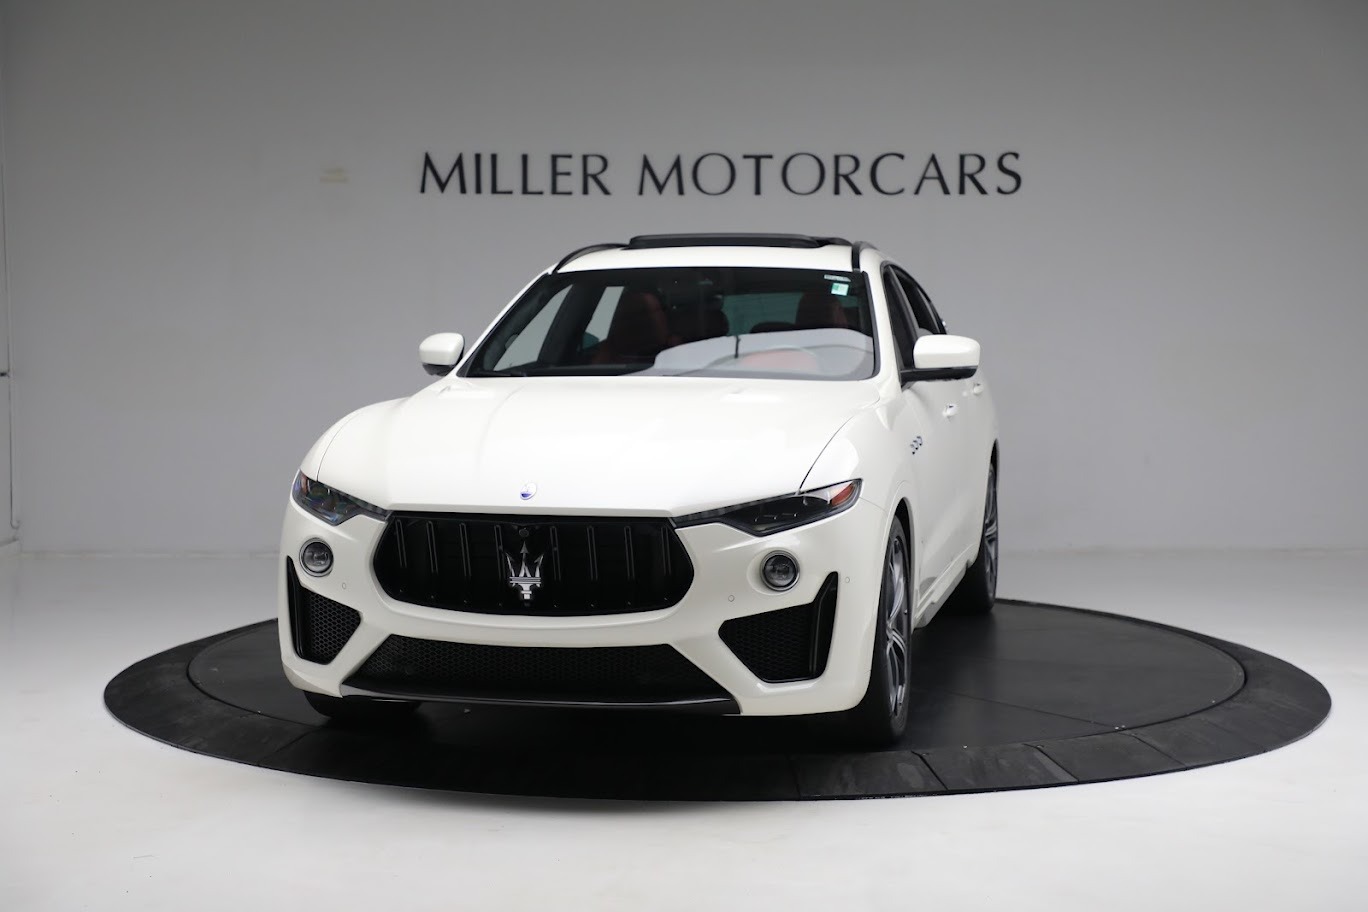 Used 2019 Maserati Levante TROFEO for sale $109,900 at Bentley Greenwich in Greenwich CT 06830 1